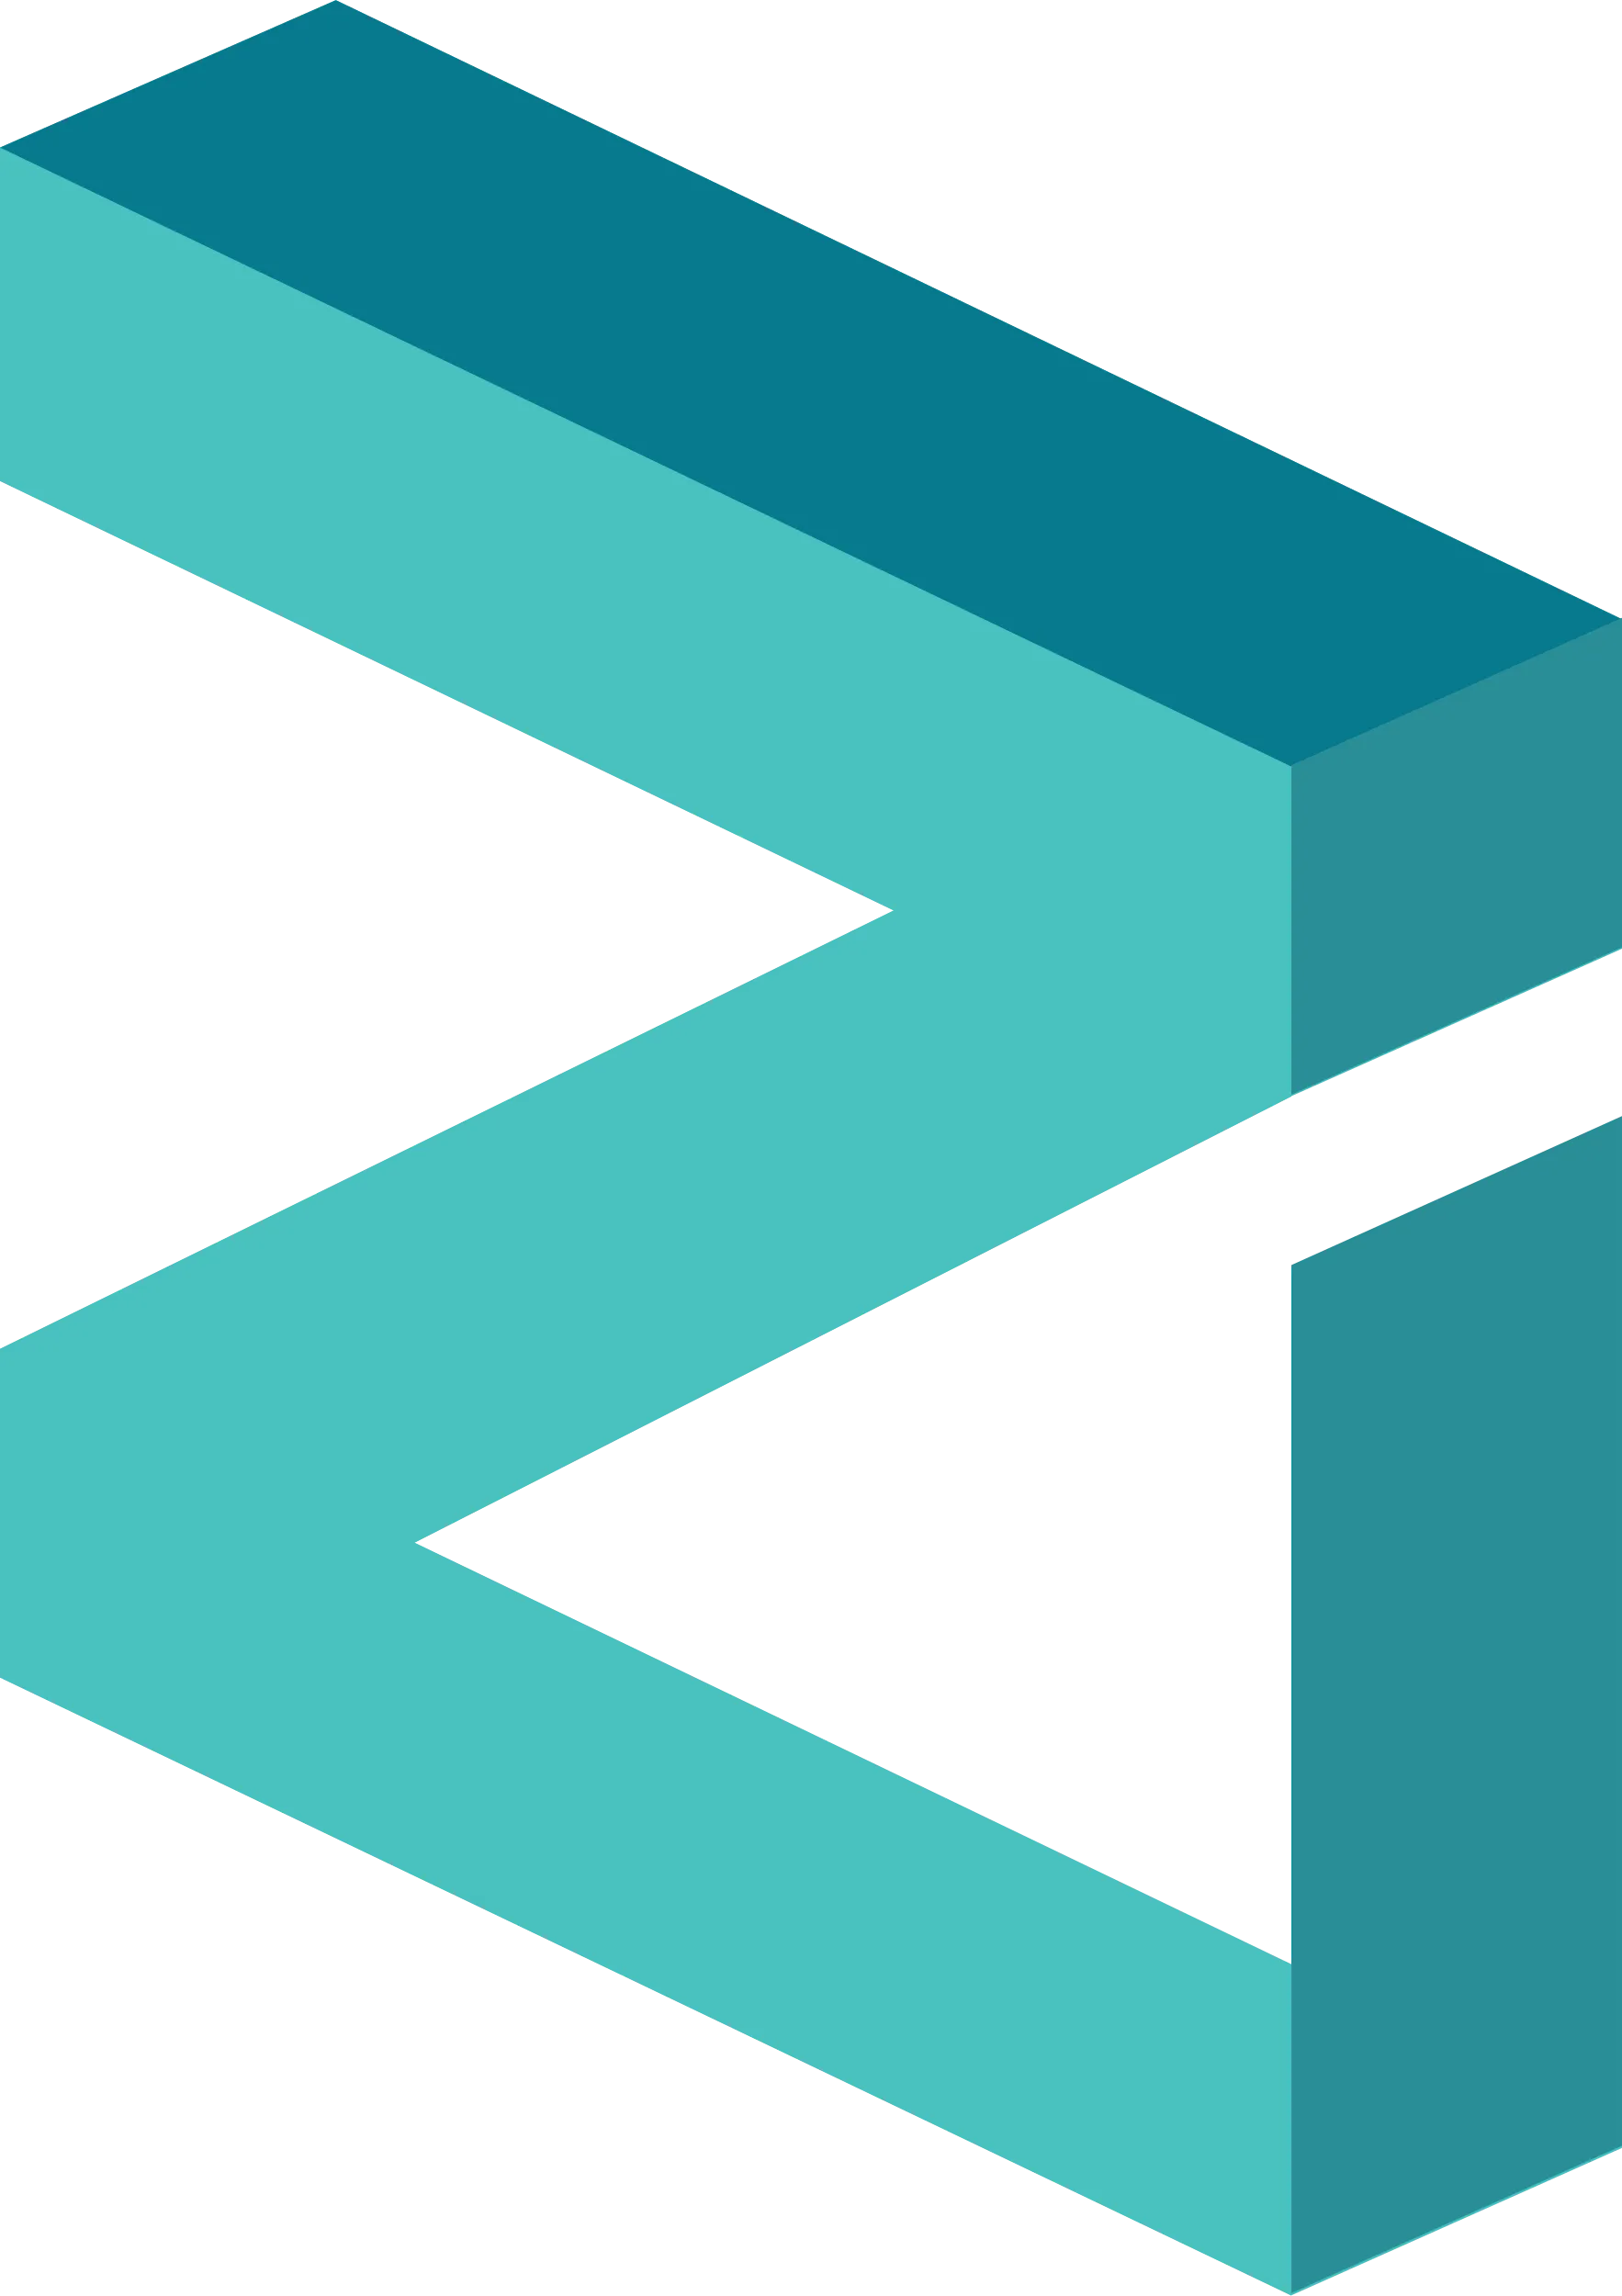 ZIL svg icon